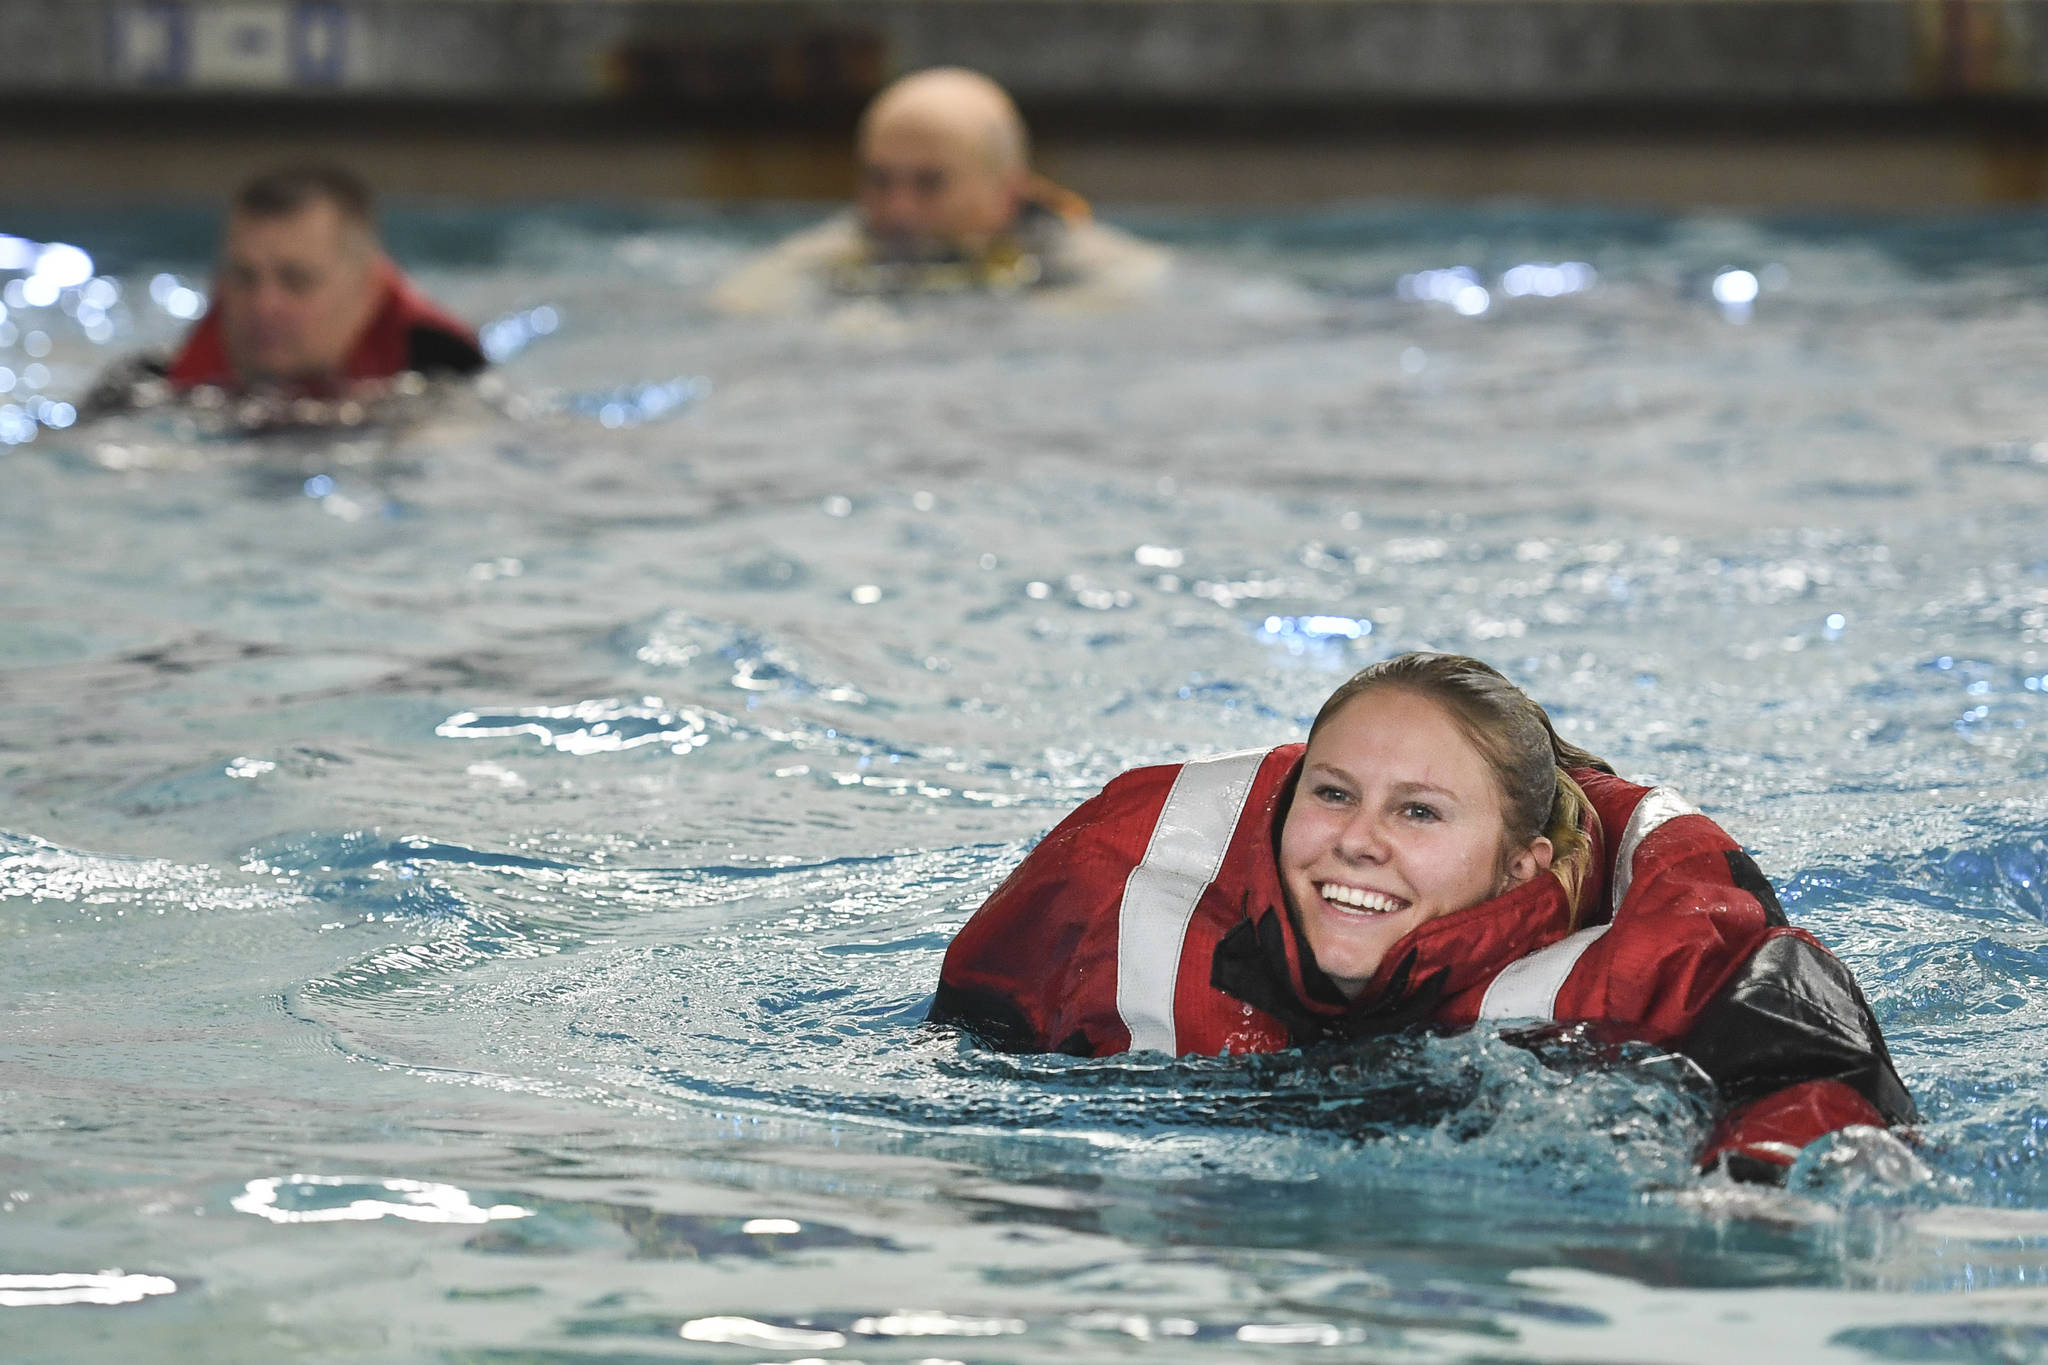 Operational Specialist 1st Class Marylee Florscher, a Coast Guardsman stationed in Juneau, takes a boating safety training class at the Augustus Brown Swimming Pool on Tuesday, Nov. 19, 2019. The class will qualify the members to teach students around the state about the use and importance of life vests. (Michael Penn | Juneau Empire)